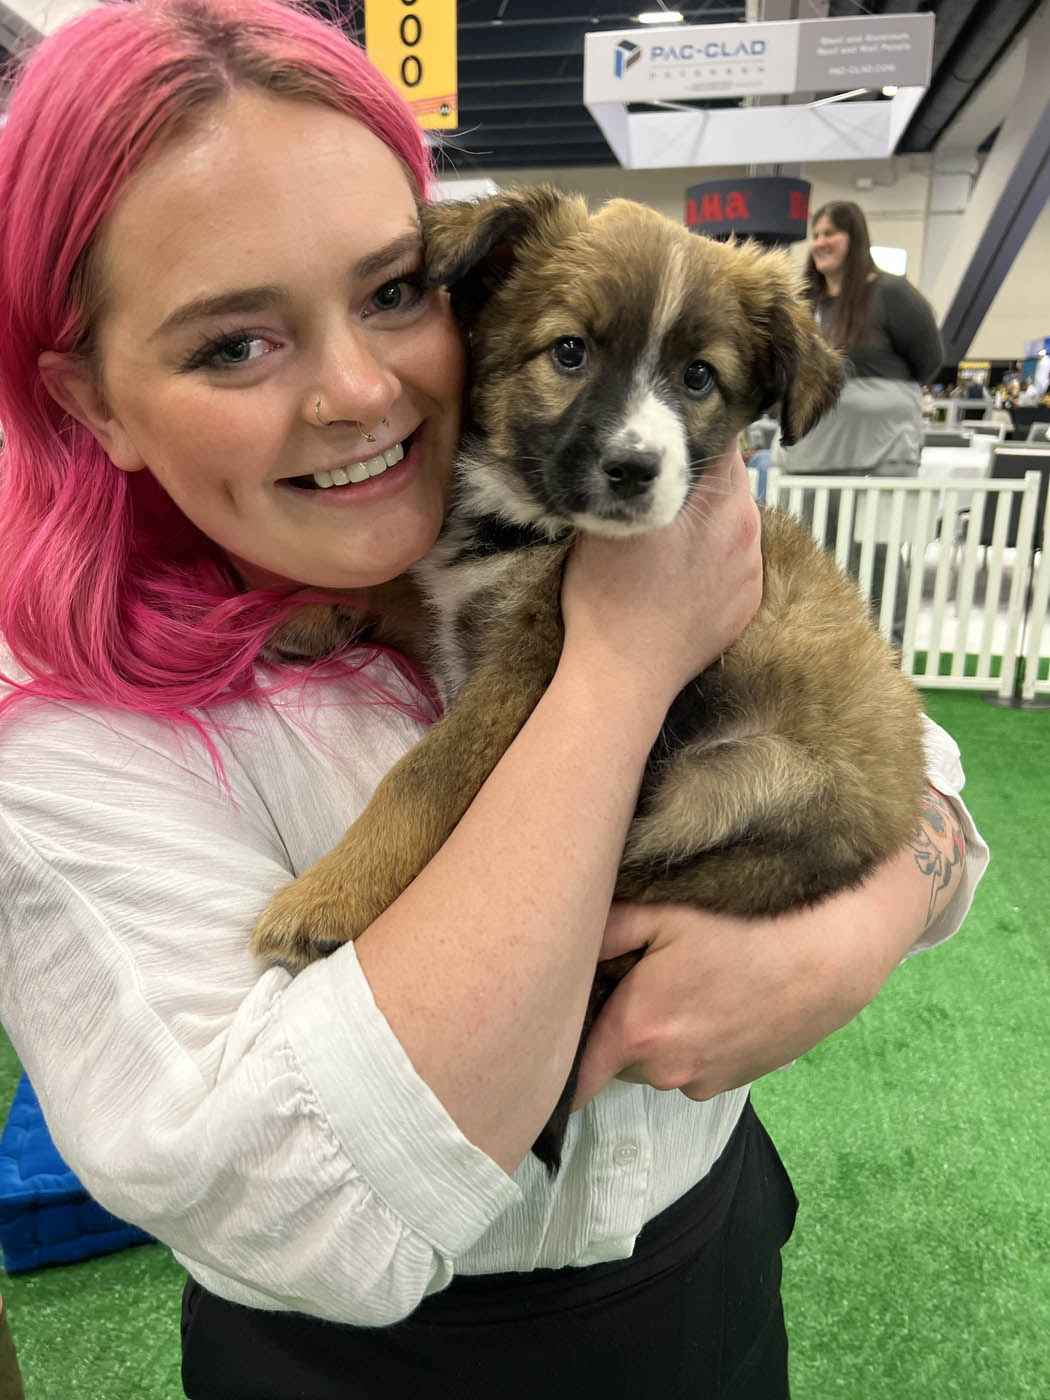 A Puppy Love puppy making the day of so many expo attendees!